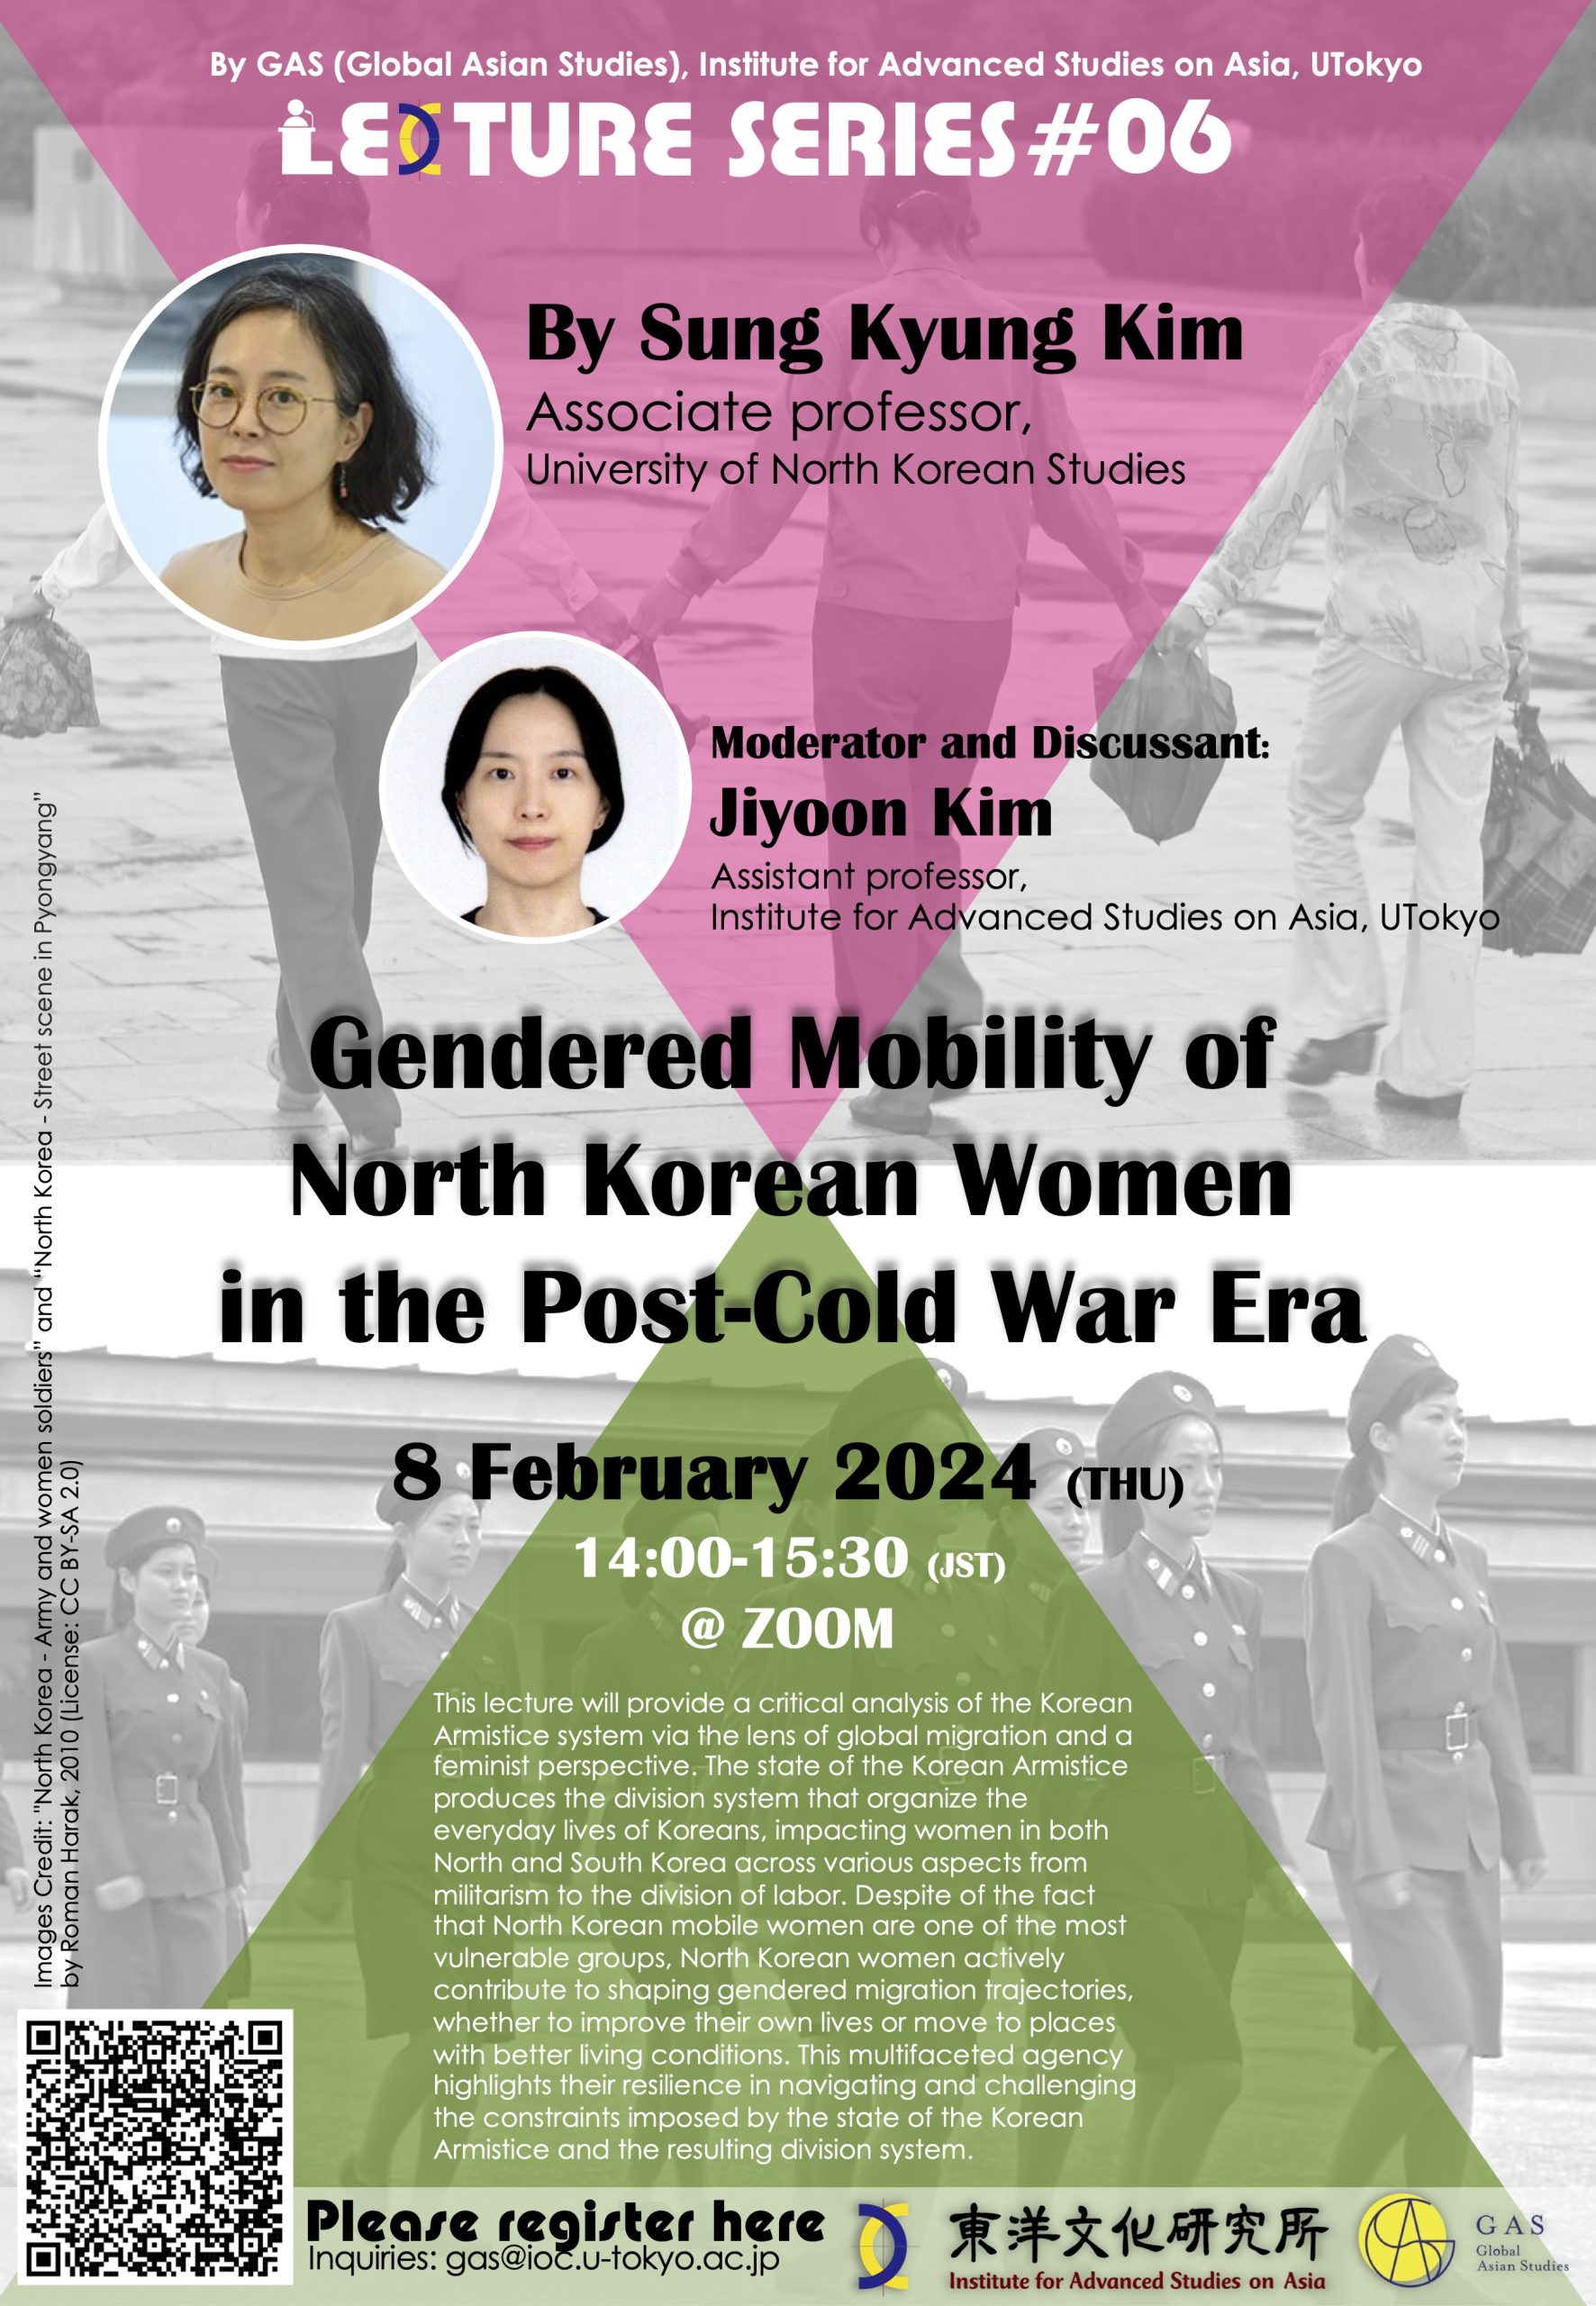 Gendered Mobility of North Korean Women in the Post-Cold War Era